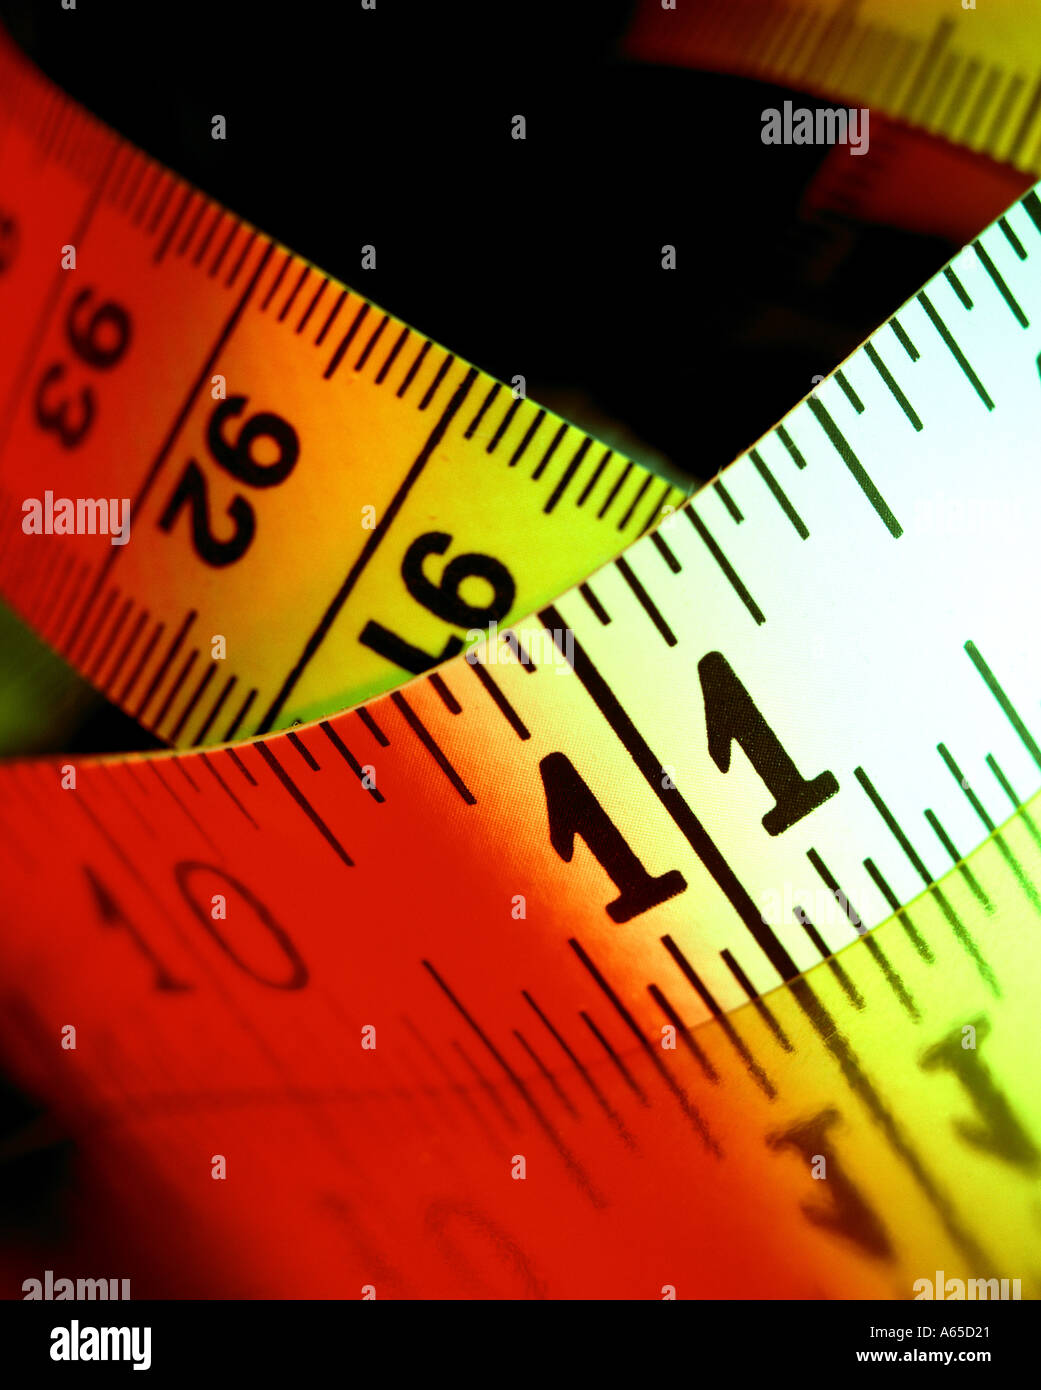 tape measure inches and centimetres Stock Photo